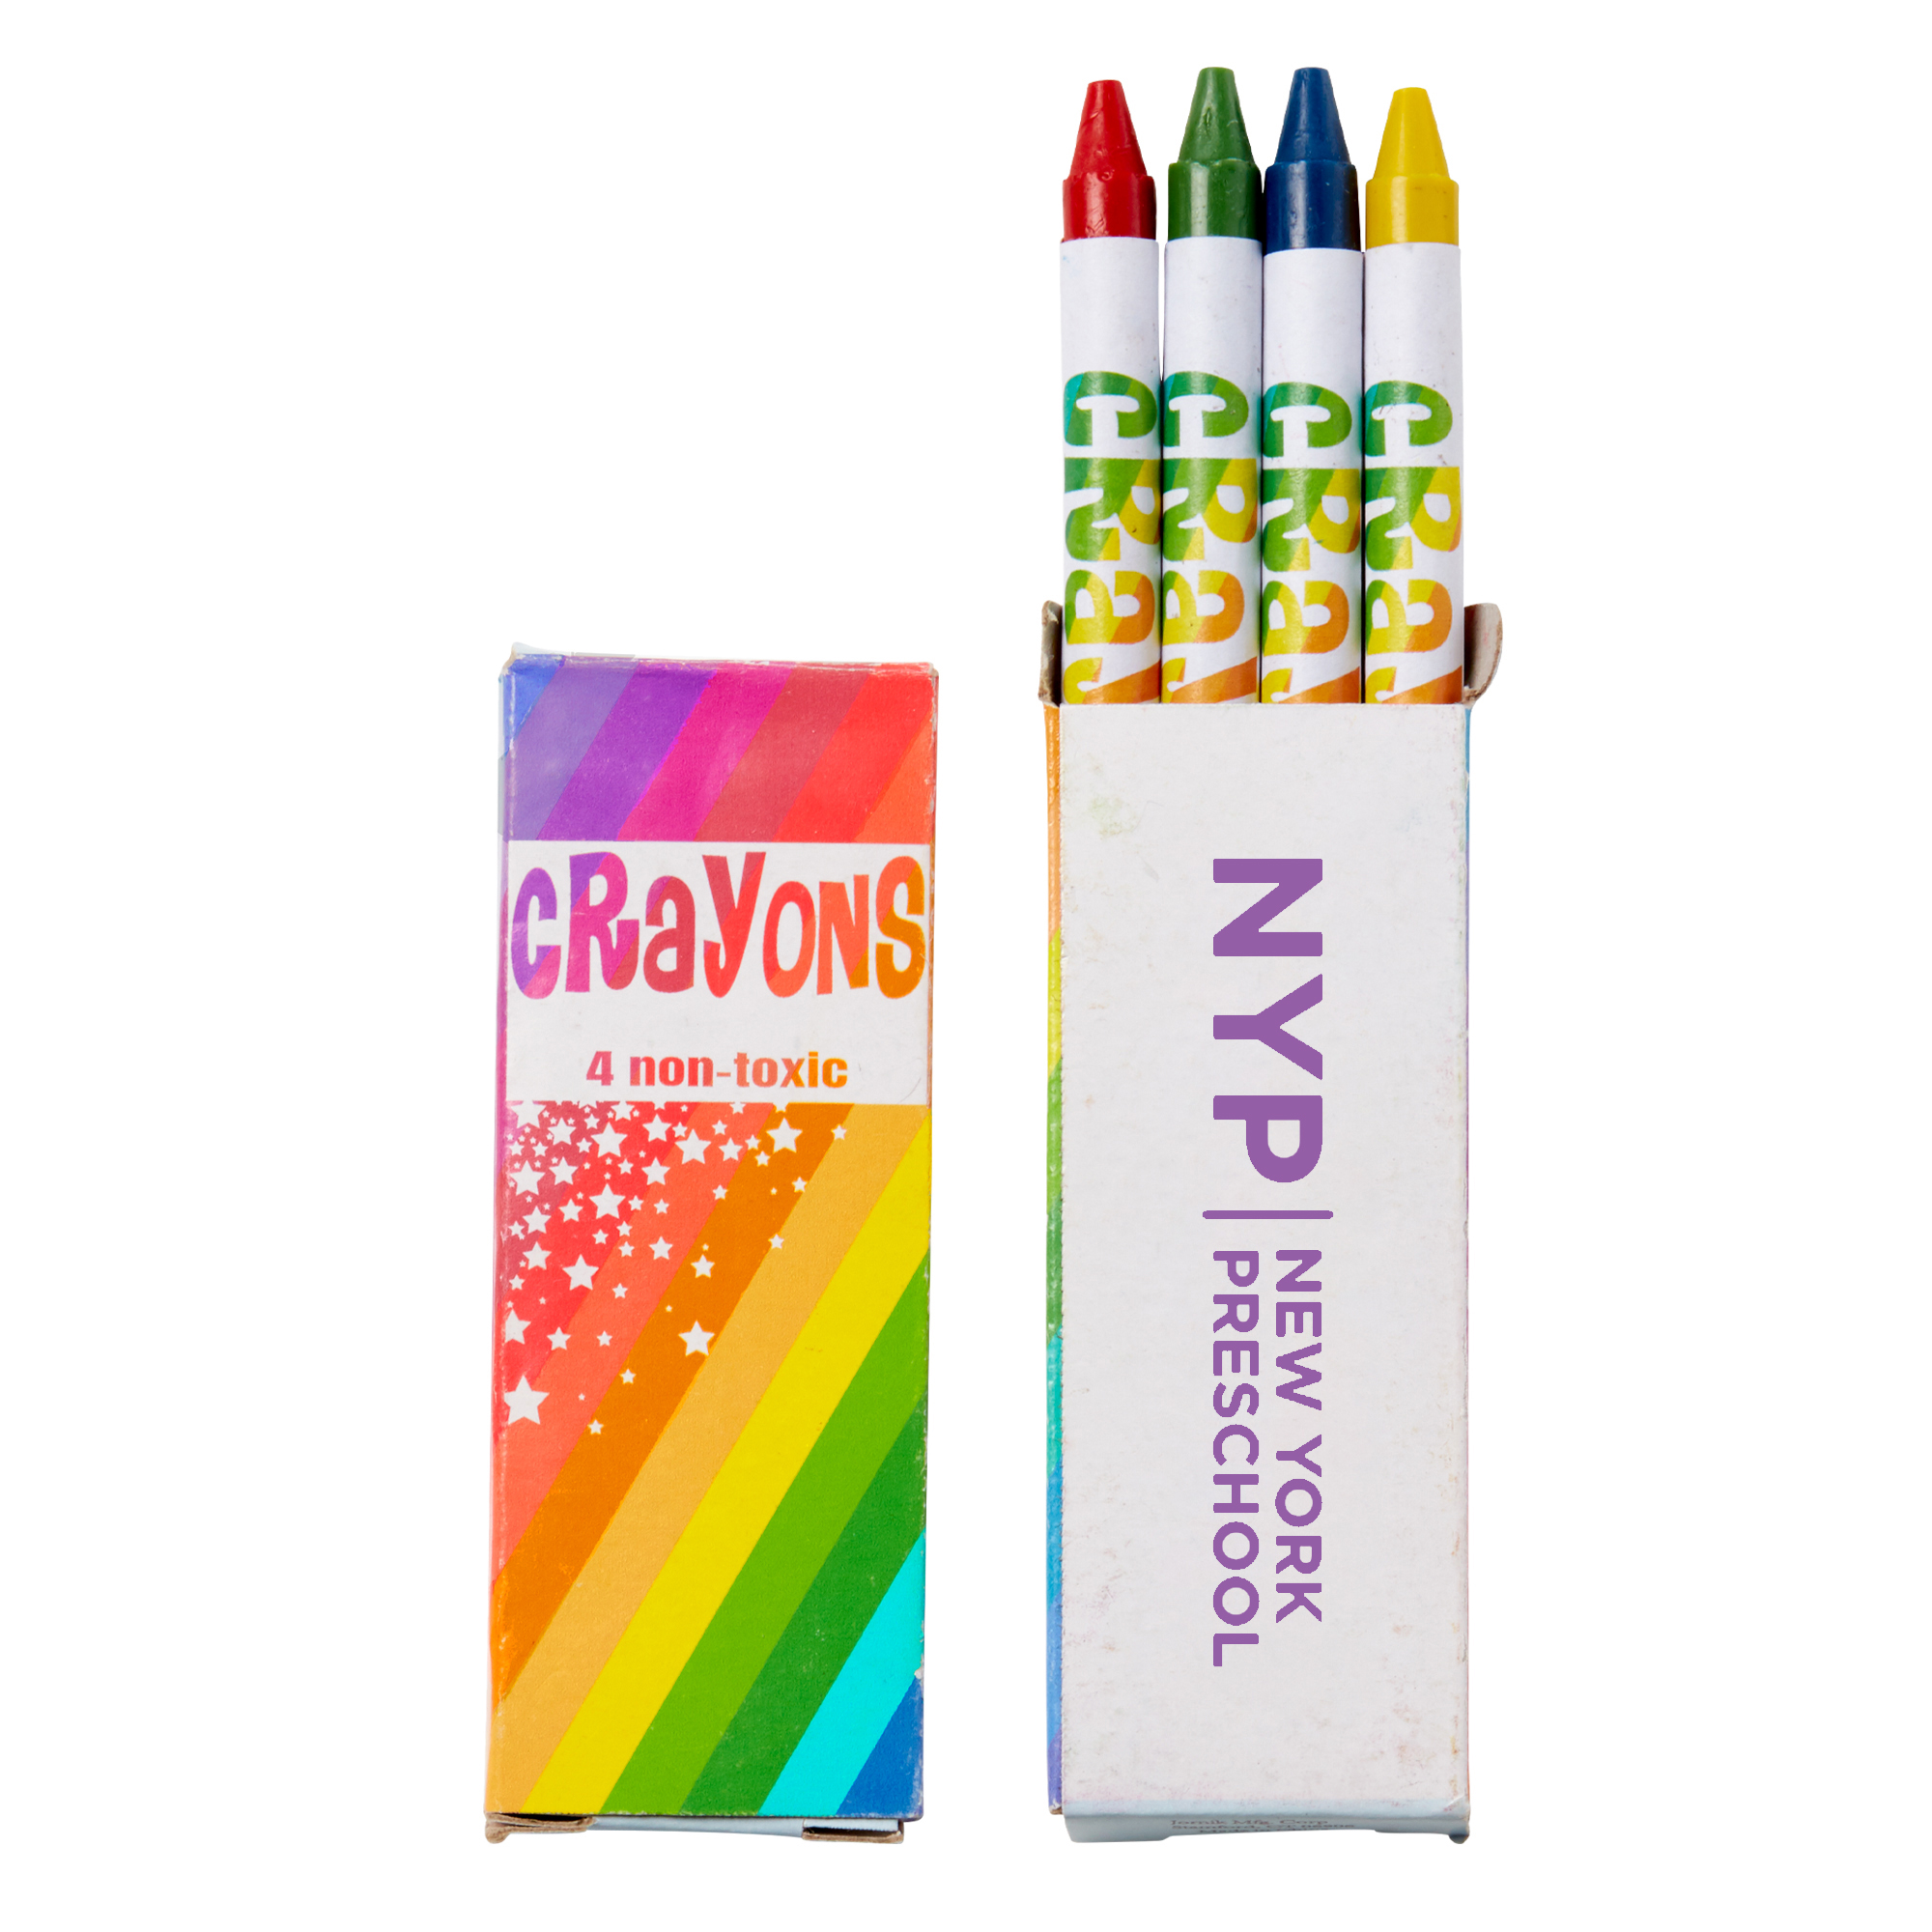 Promotional Deluxe 7X7 Adult Coloring Book & 8-Color Pencil Set $3.98